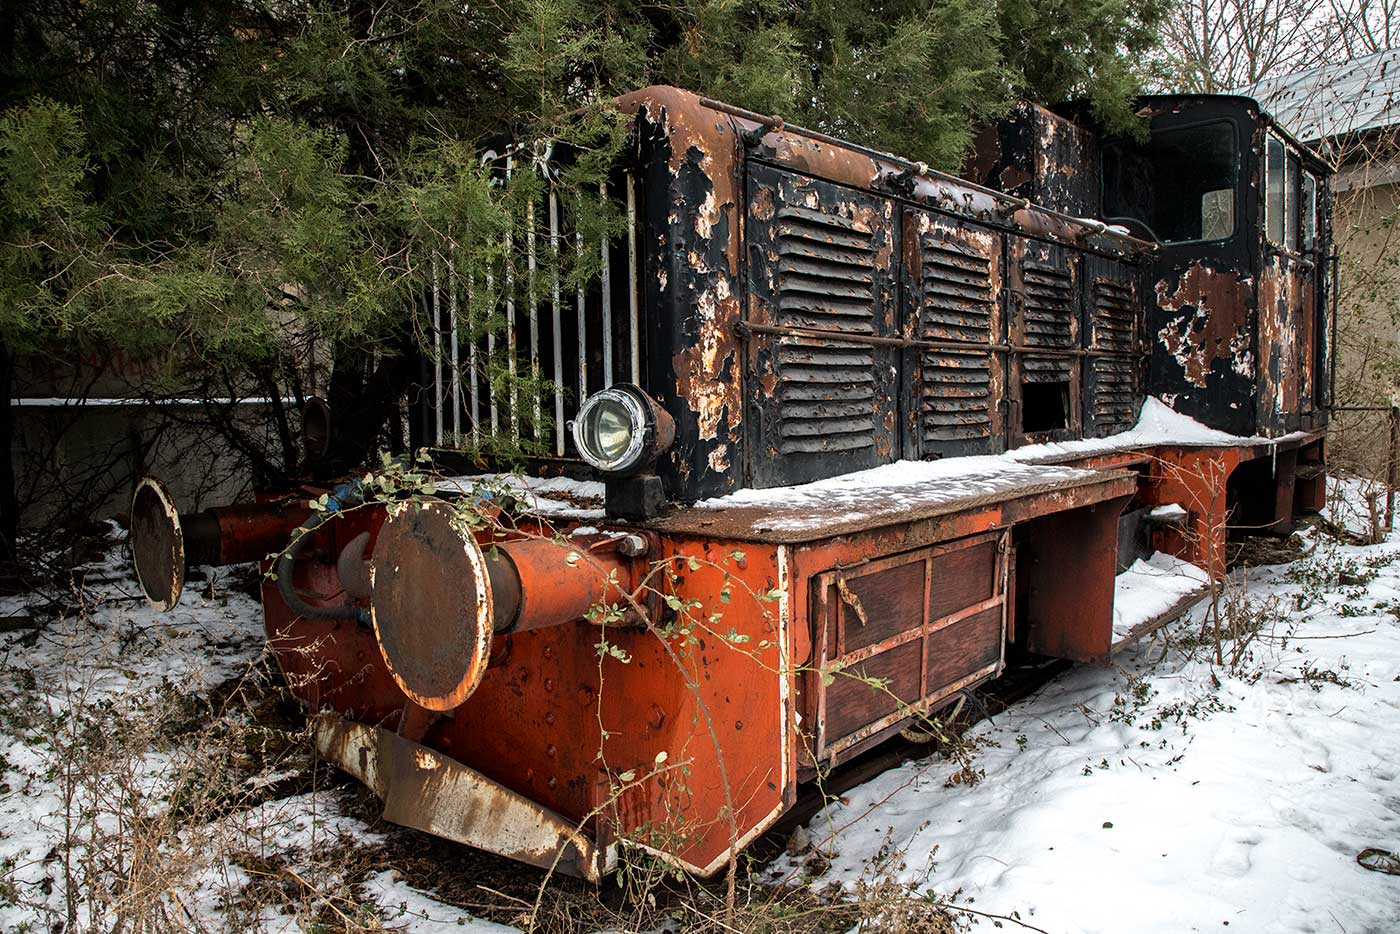 Near the train hangars, this engine is in the process of being absorbed into the undergrowth.